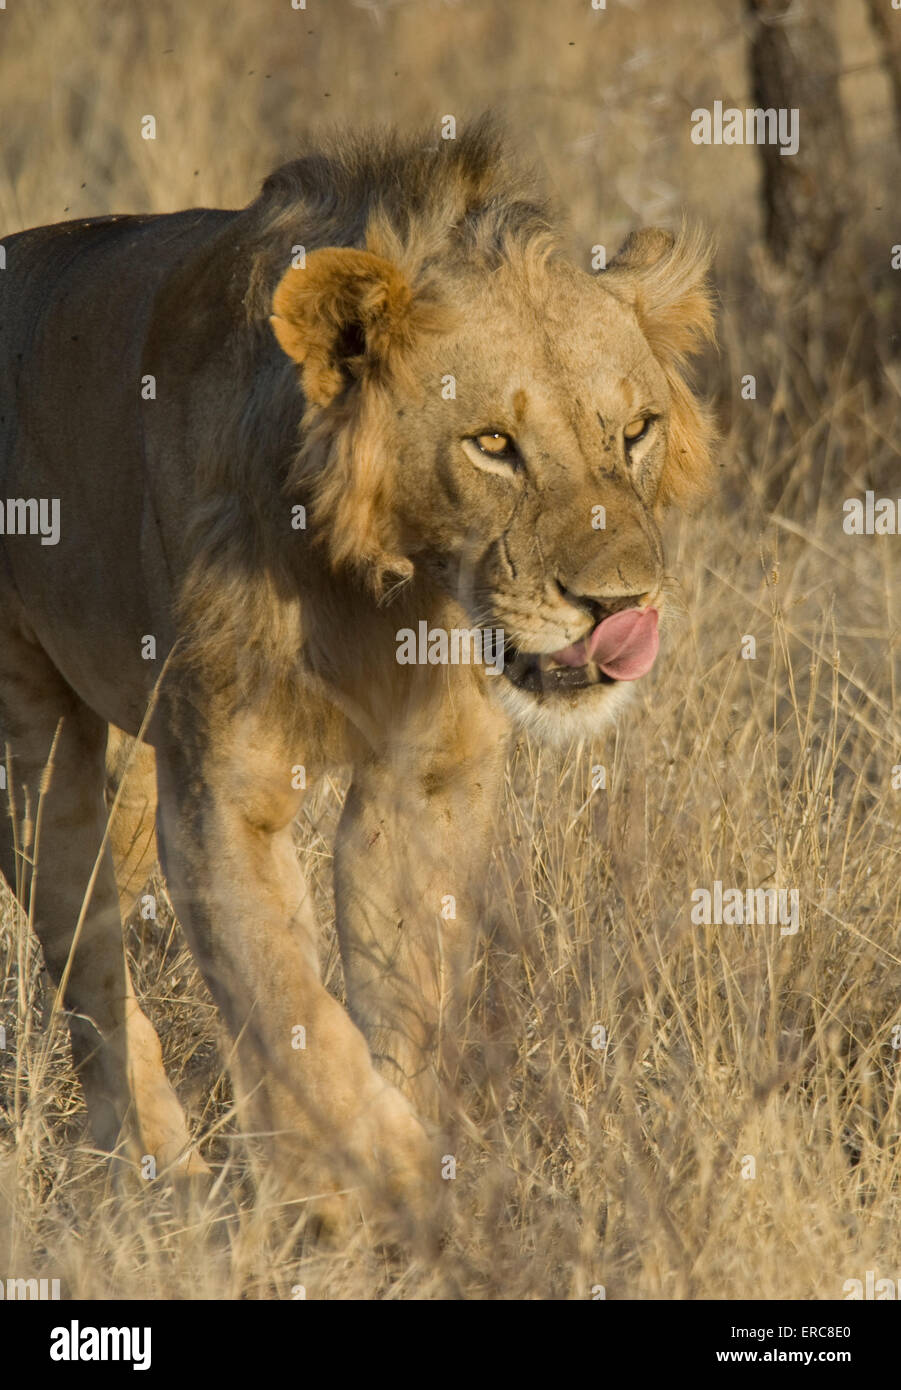 MALE LION WALKING IN PLAINS LICKING HIS LIPS WITH PINK TONGUE Stock Photo